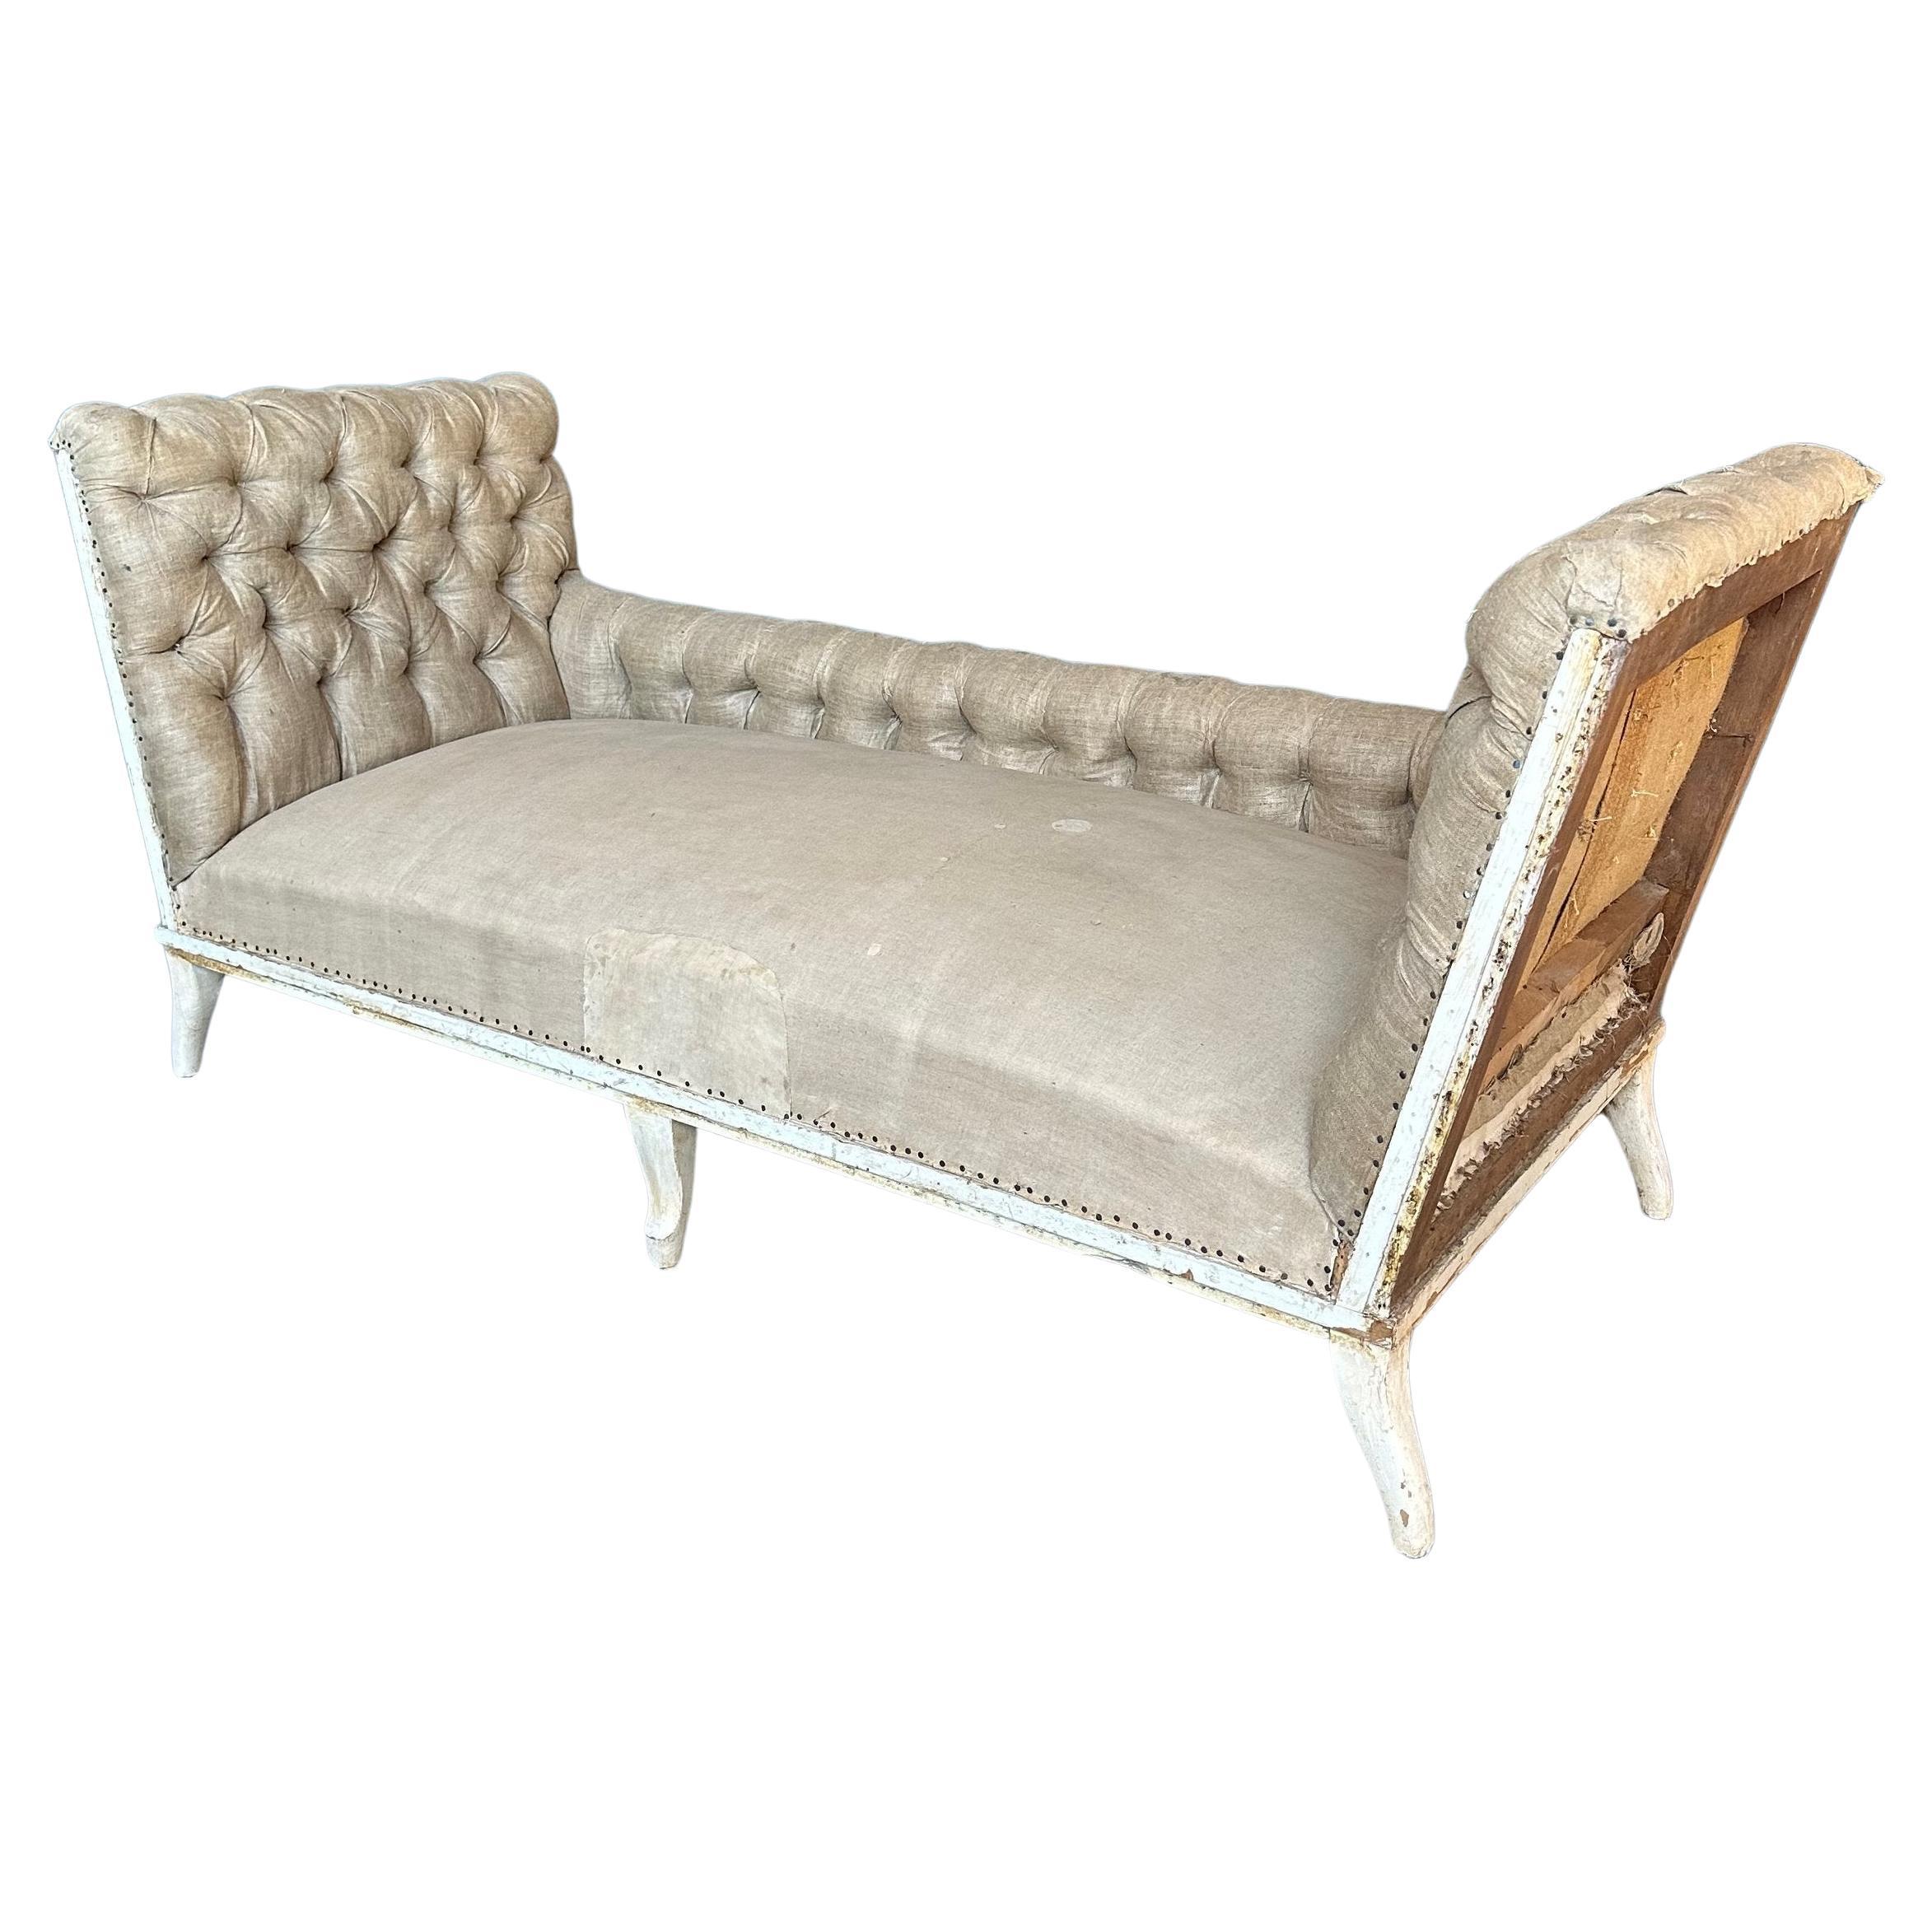 Large French Tufted Napoleon III Sofa with Extended Arms